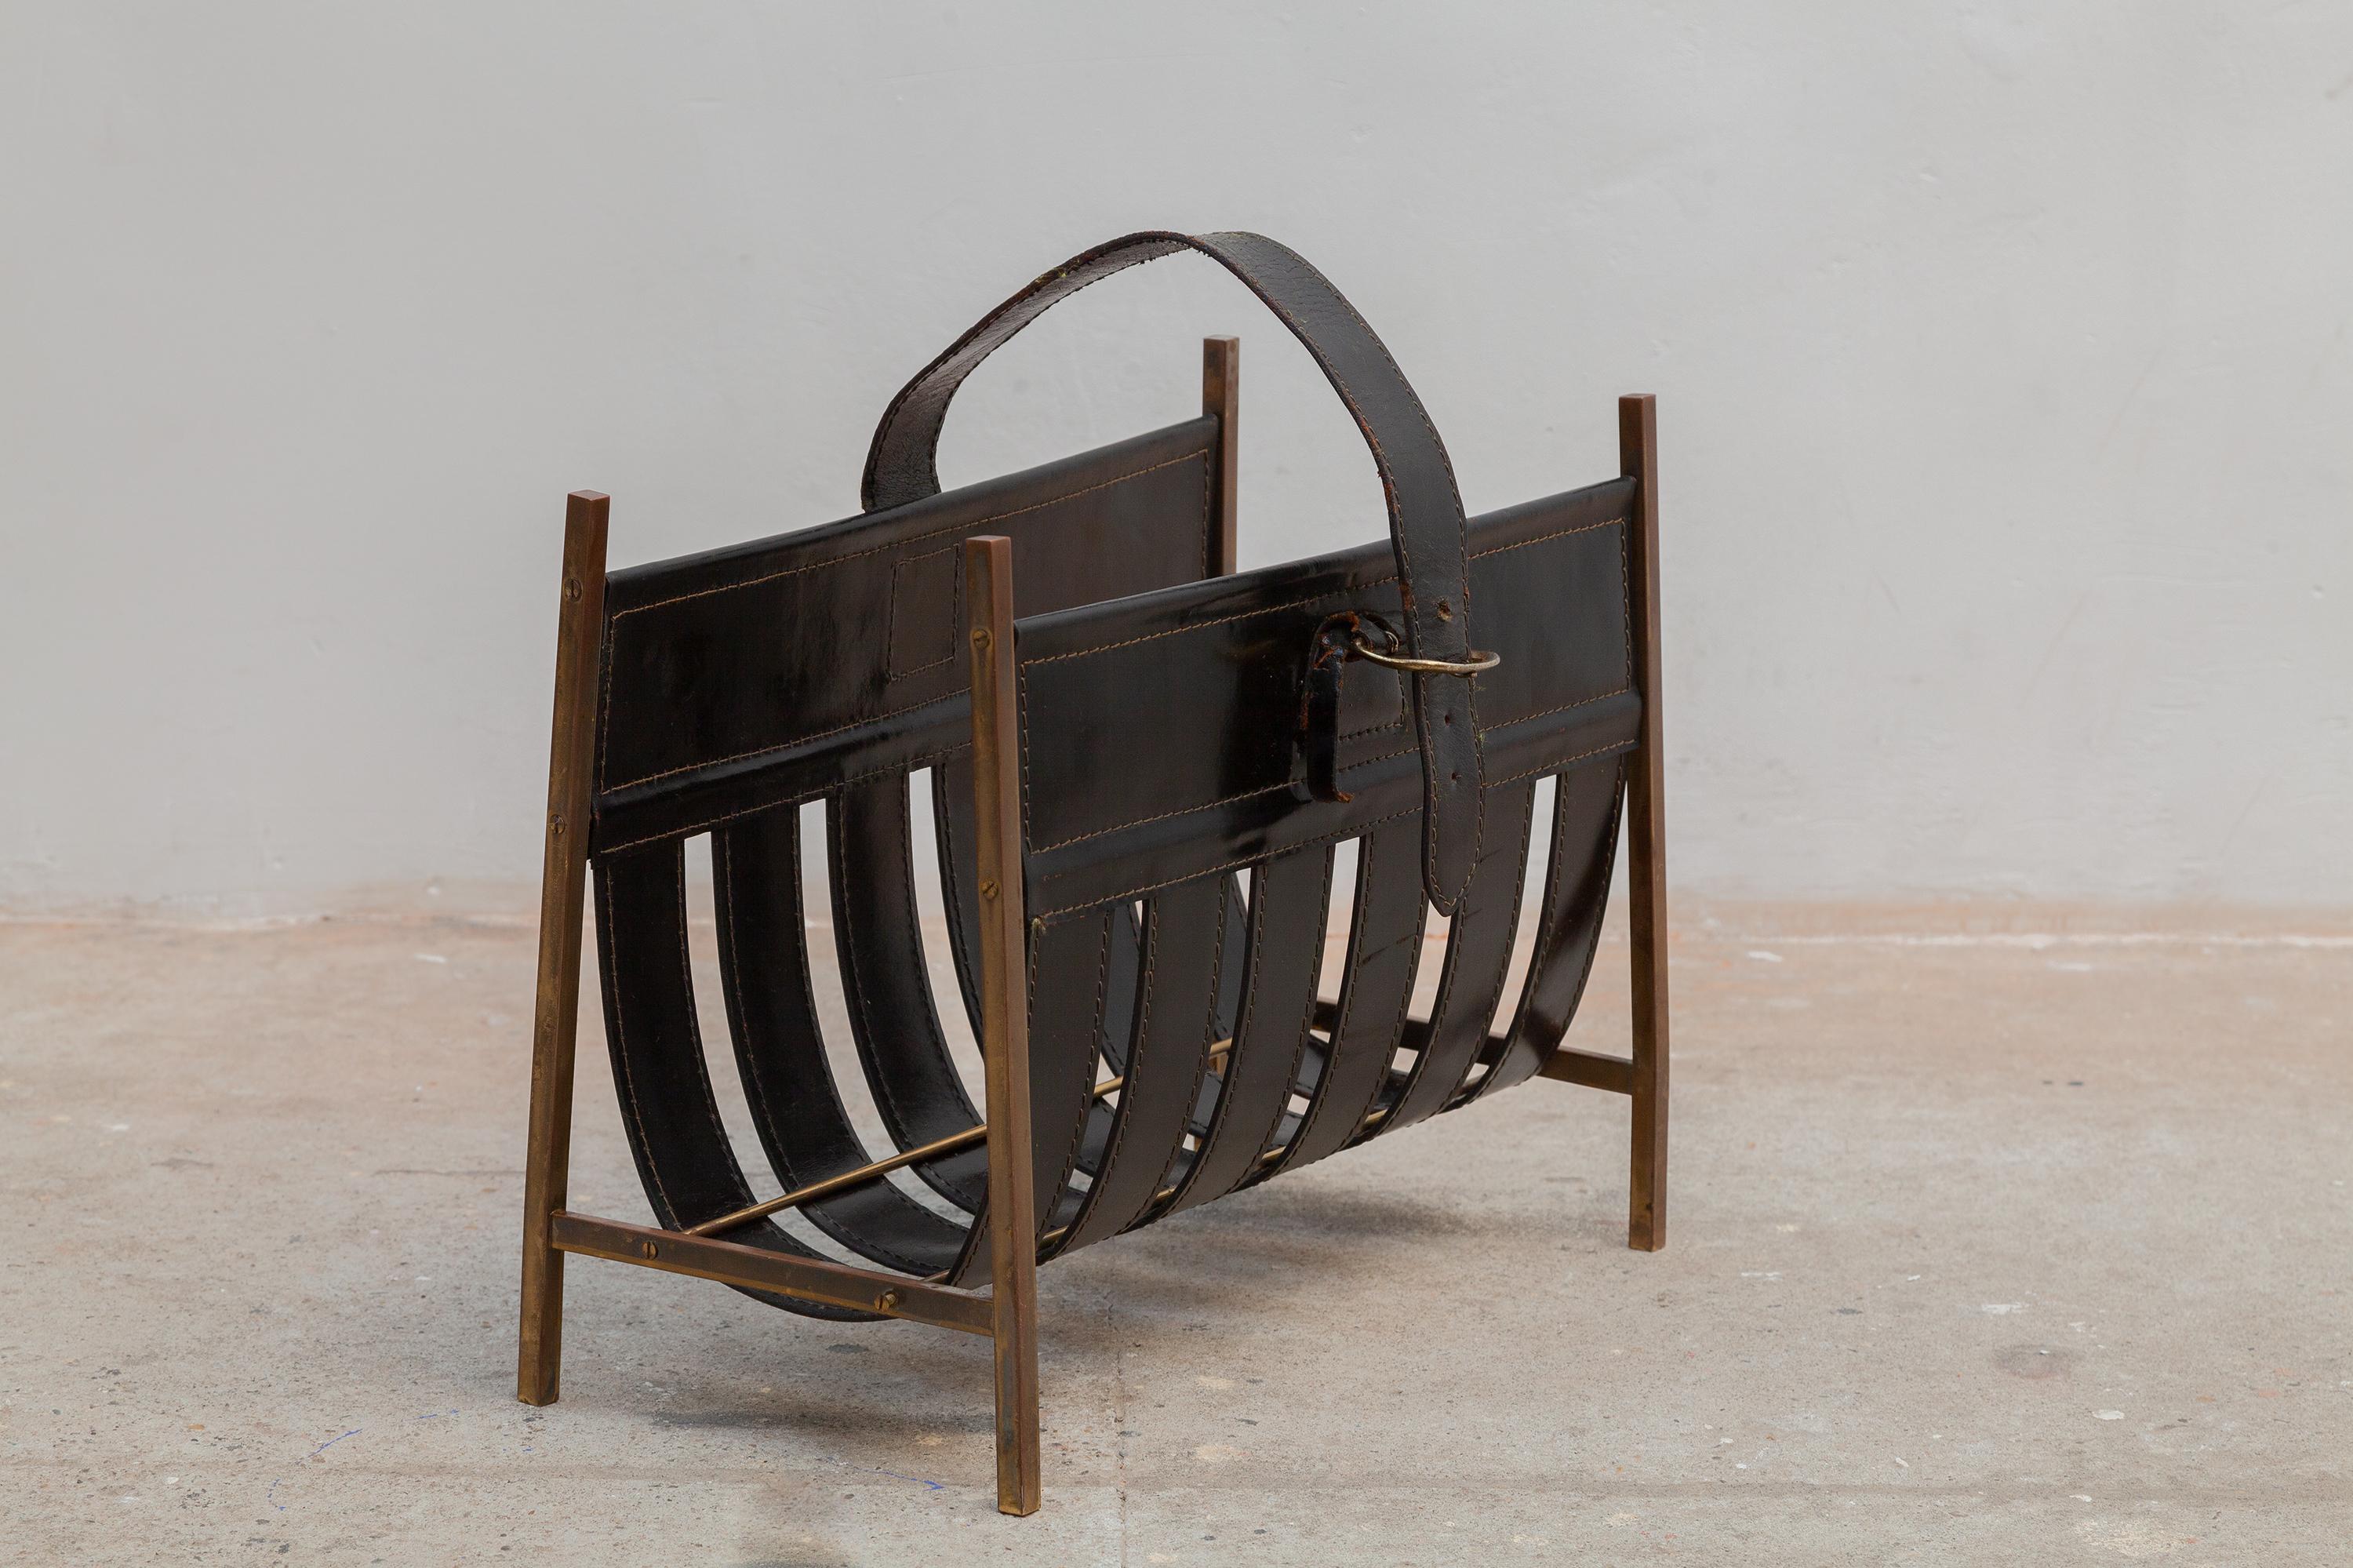 Vintage midcentury magazine rack or fireplace caddy. Metal frame with black leather sling and belt strap. 
Dimensions: 42 W x 33 H x 19 D cm.